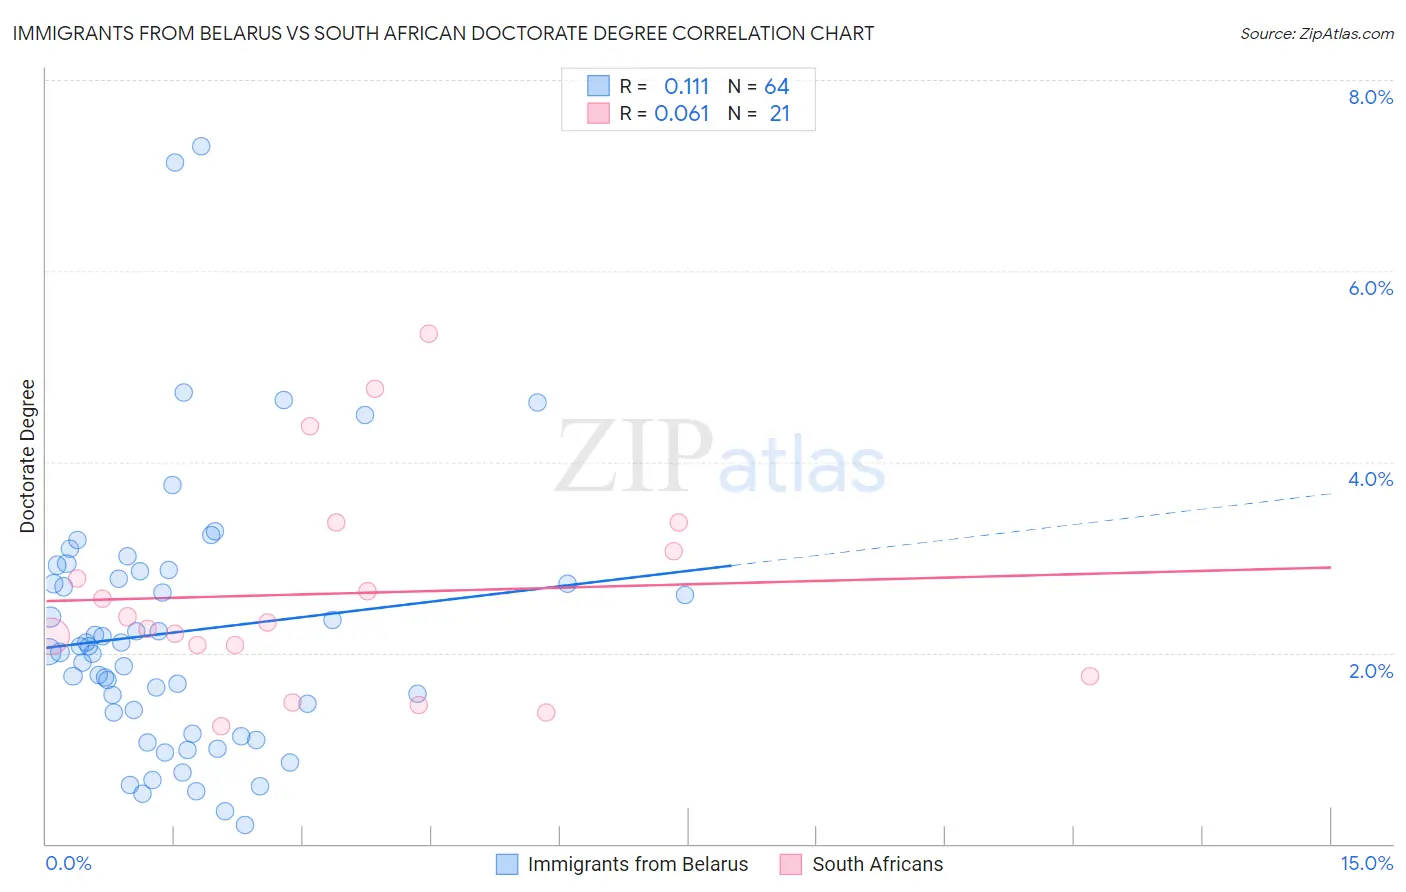 Immigrants from Belarus vs South African Doctorate Degree